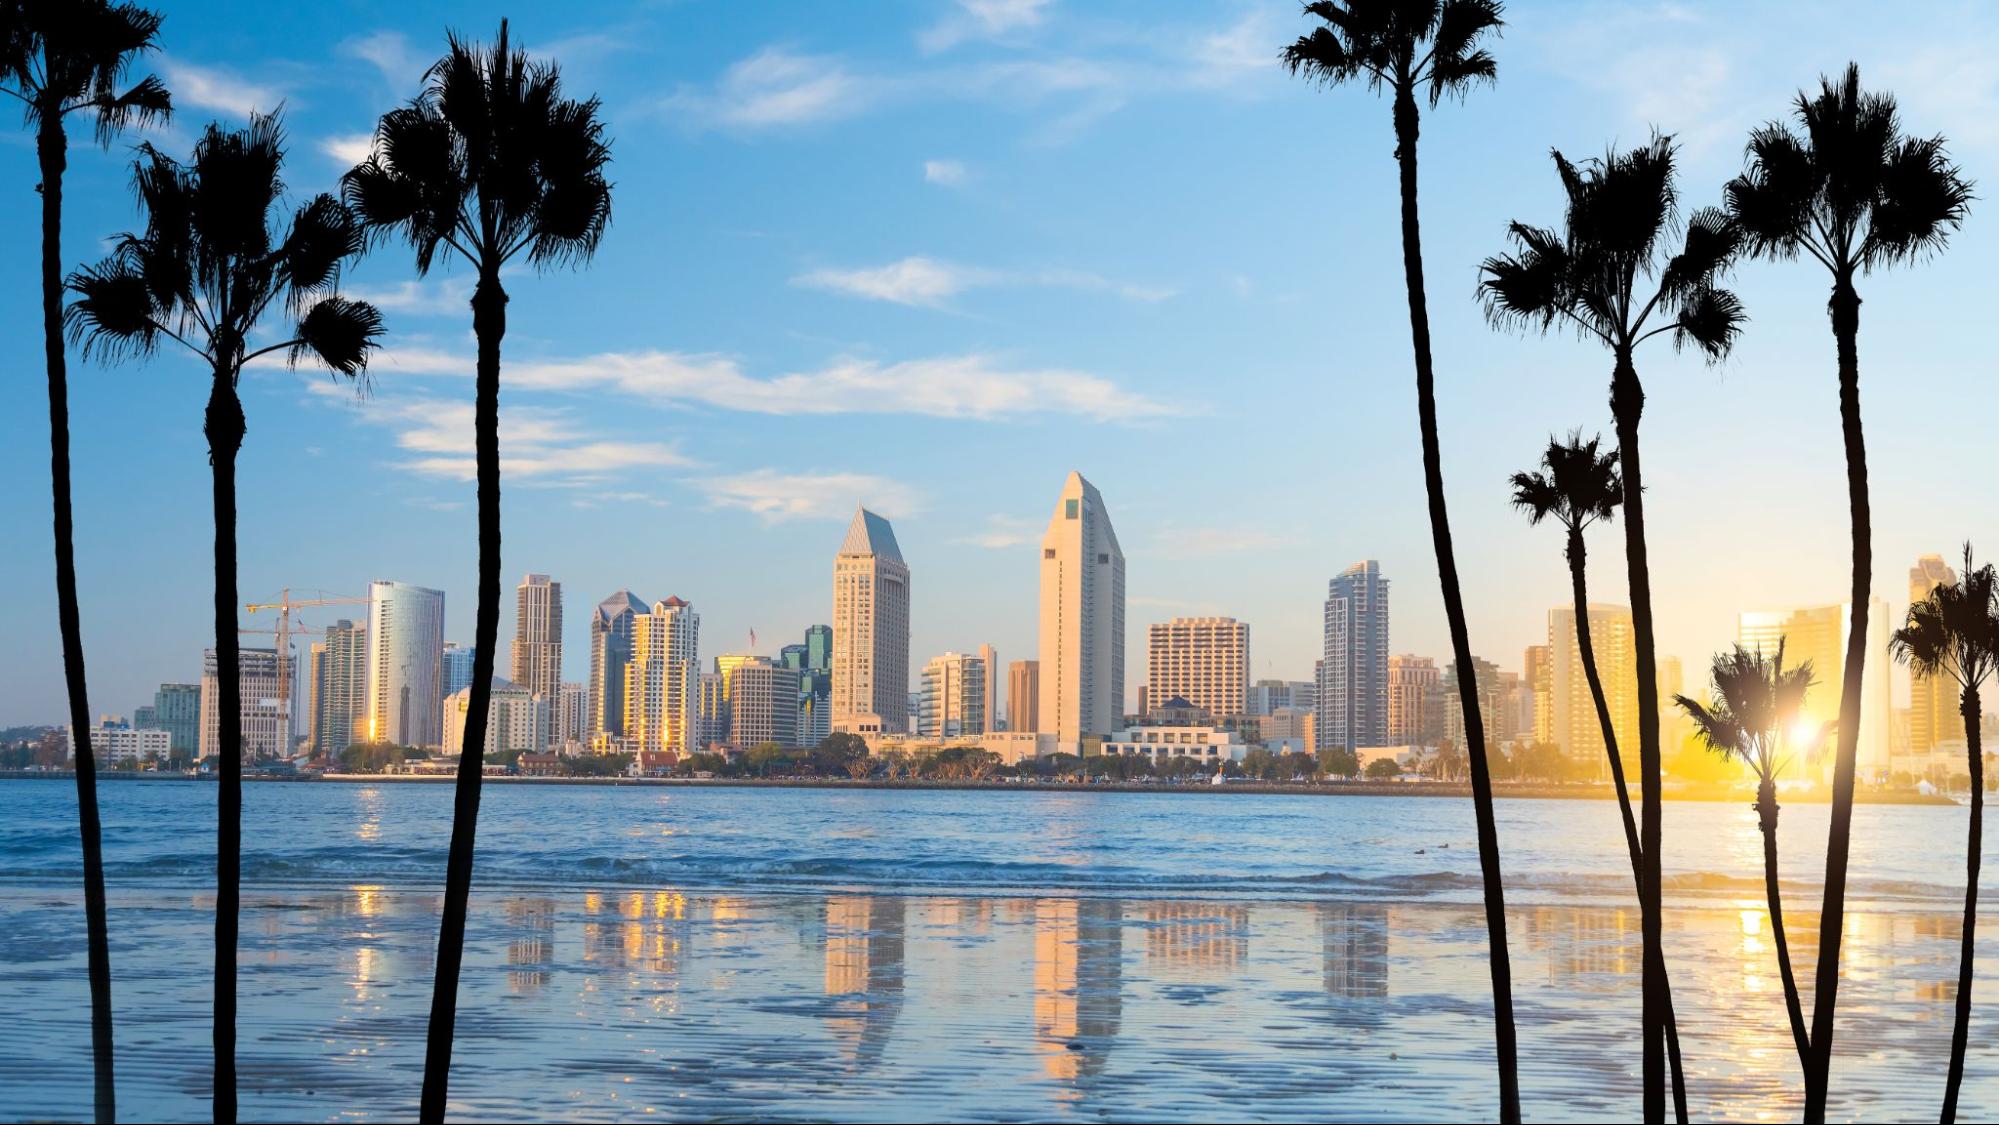 Living in San Diego: 9 Pros and Cons